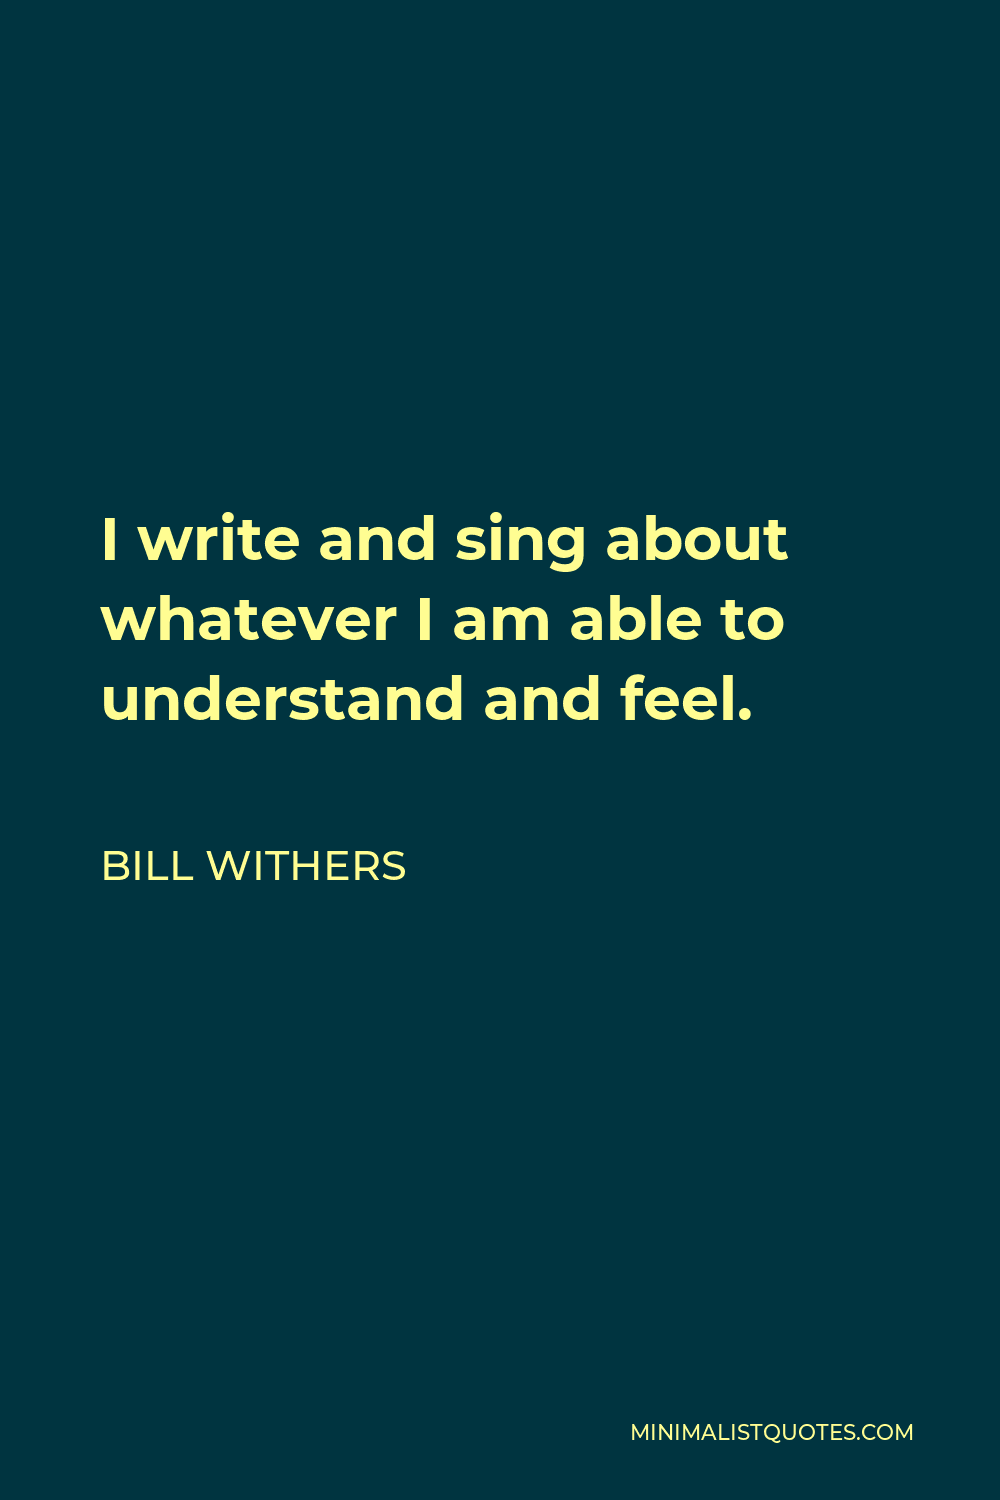 Bill Withers Quote - I write and sing about whatever I am able to understand and feel.